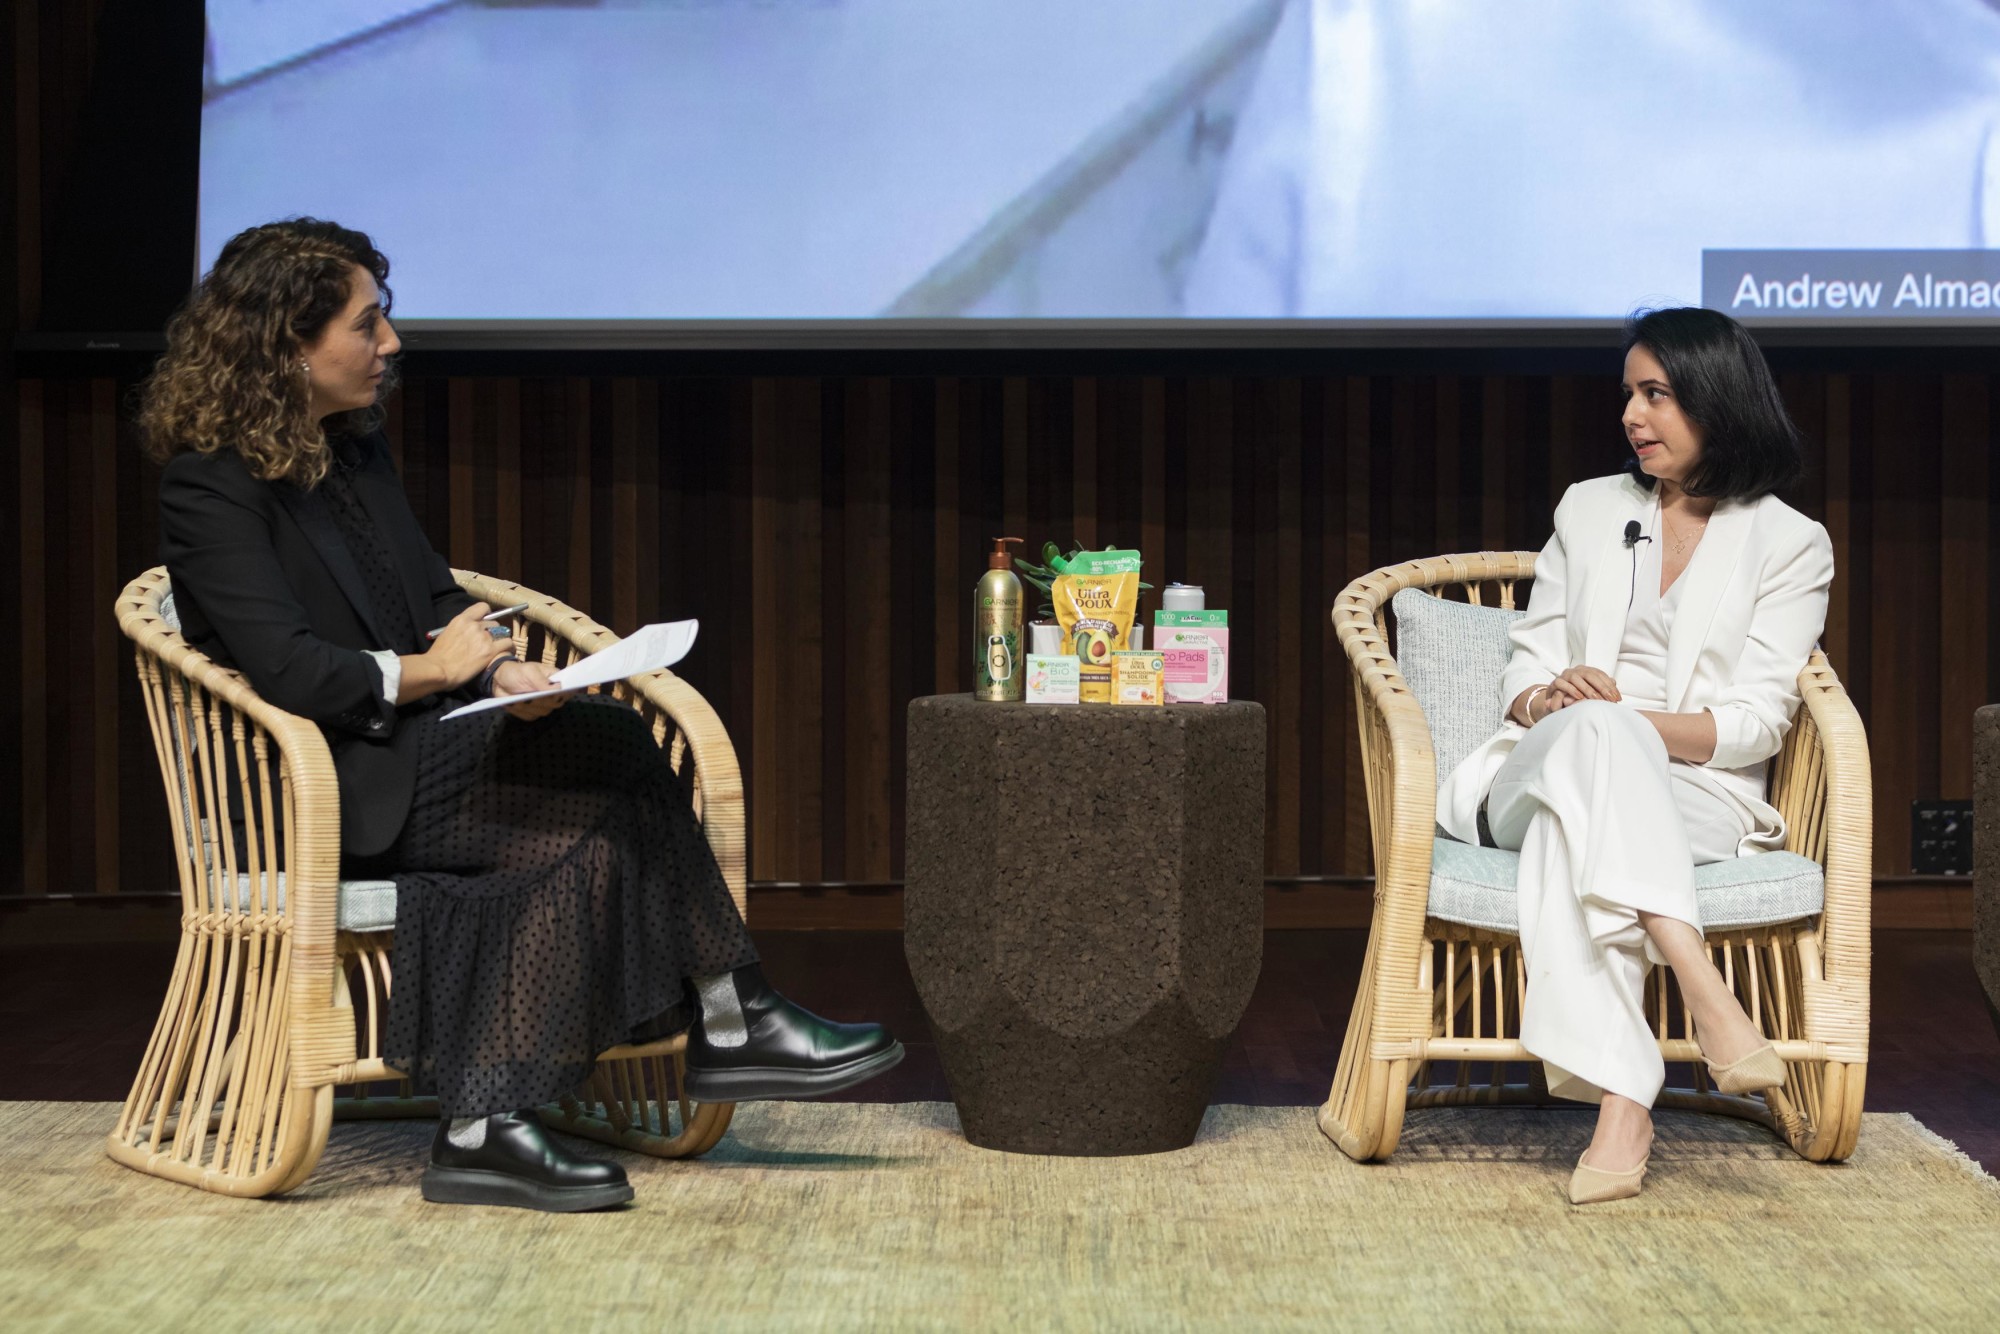 Mariam Farag, Brand Humanity (L), media & communications strategist, CEO & Founder of Humanizing Brands and Najia Qazi (R), Sustainability advocte and Founder of Sustainable narrative during the L’Oreal x Garnier “Can Beauty Go Green”